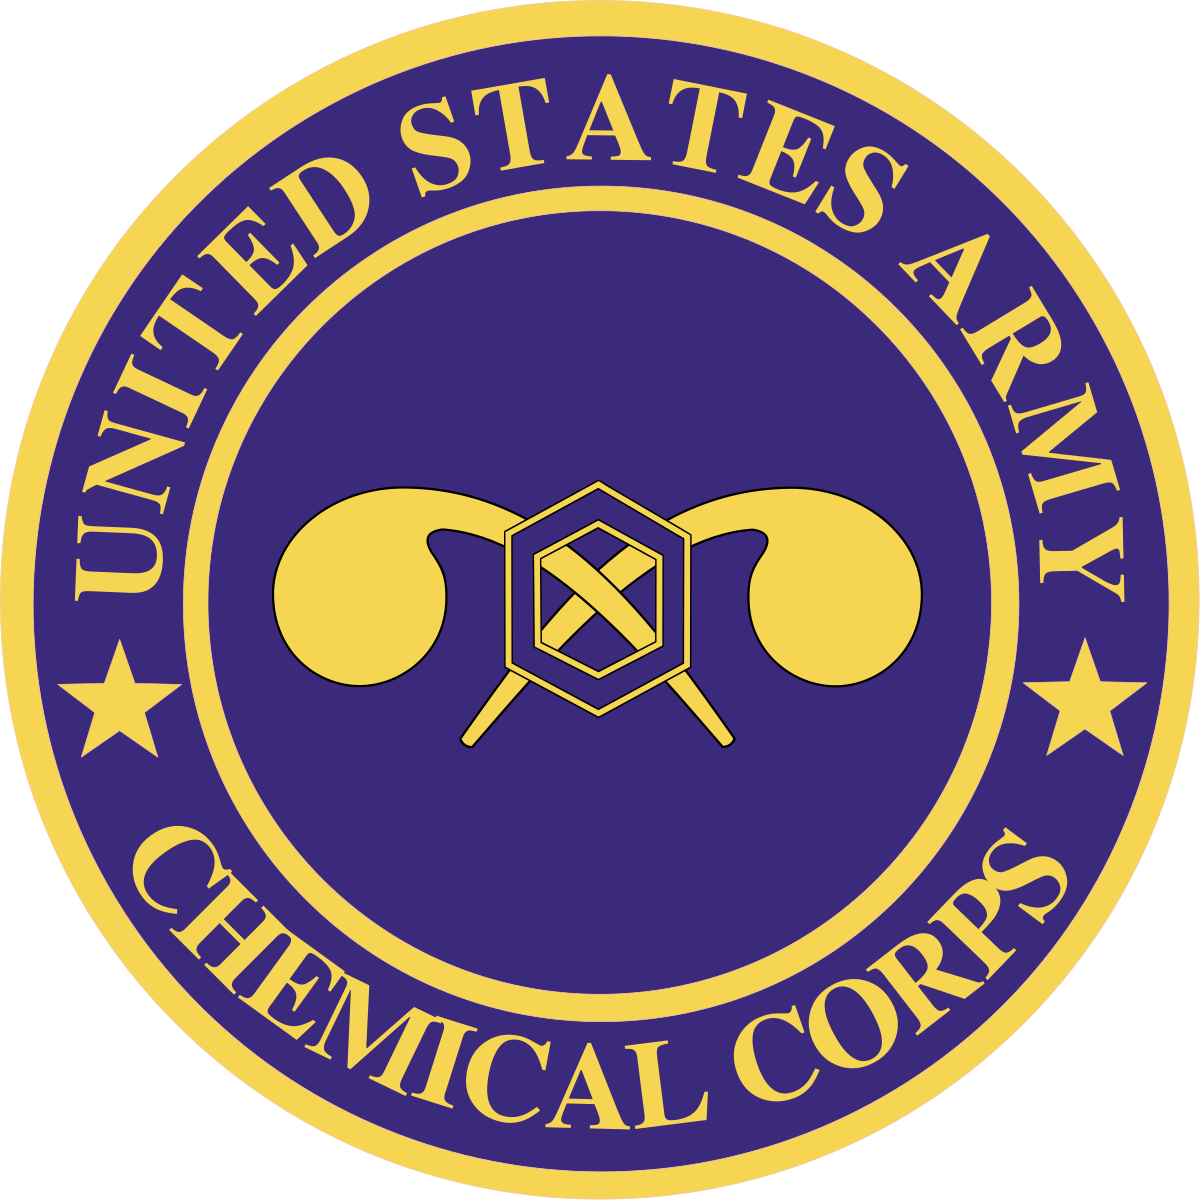 US Army Chemical Corps